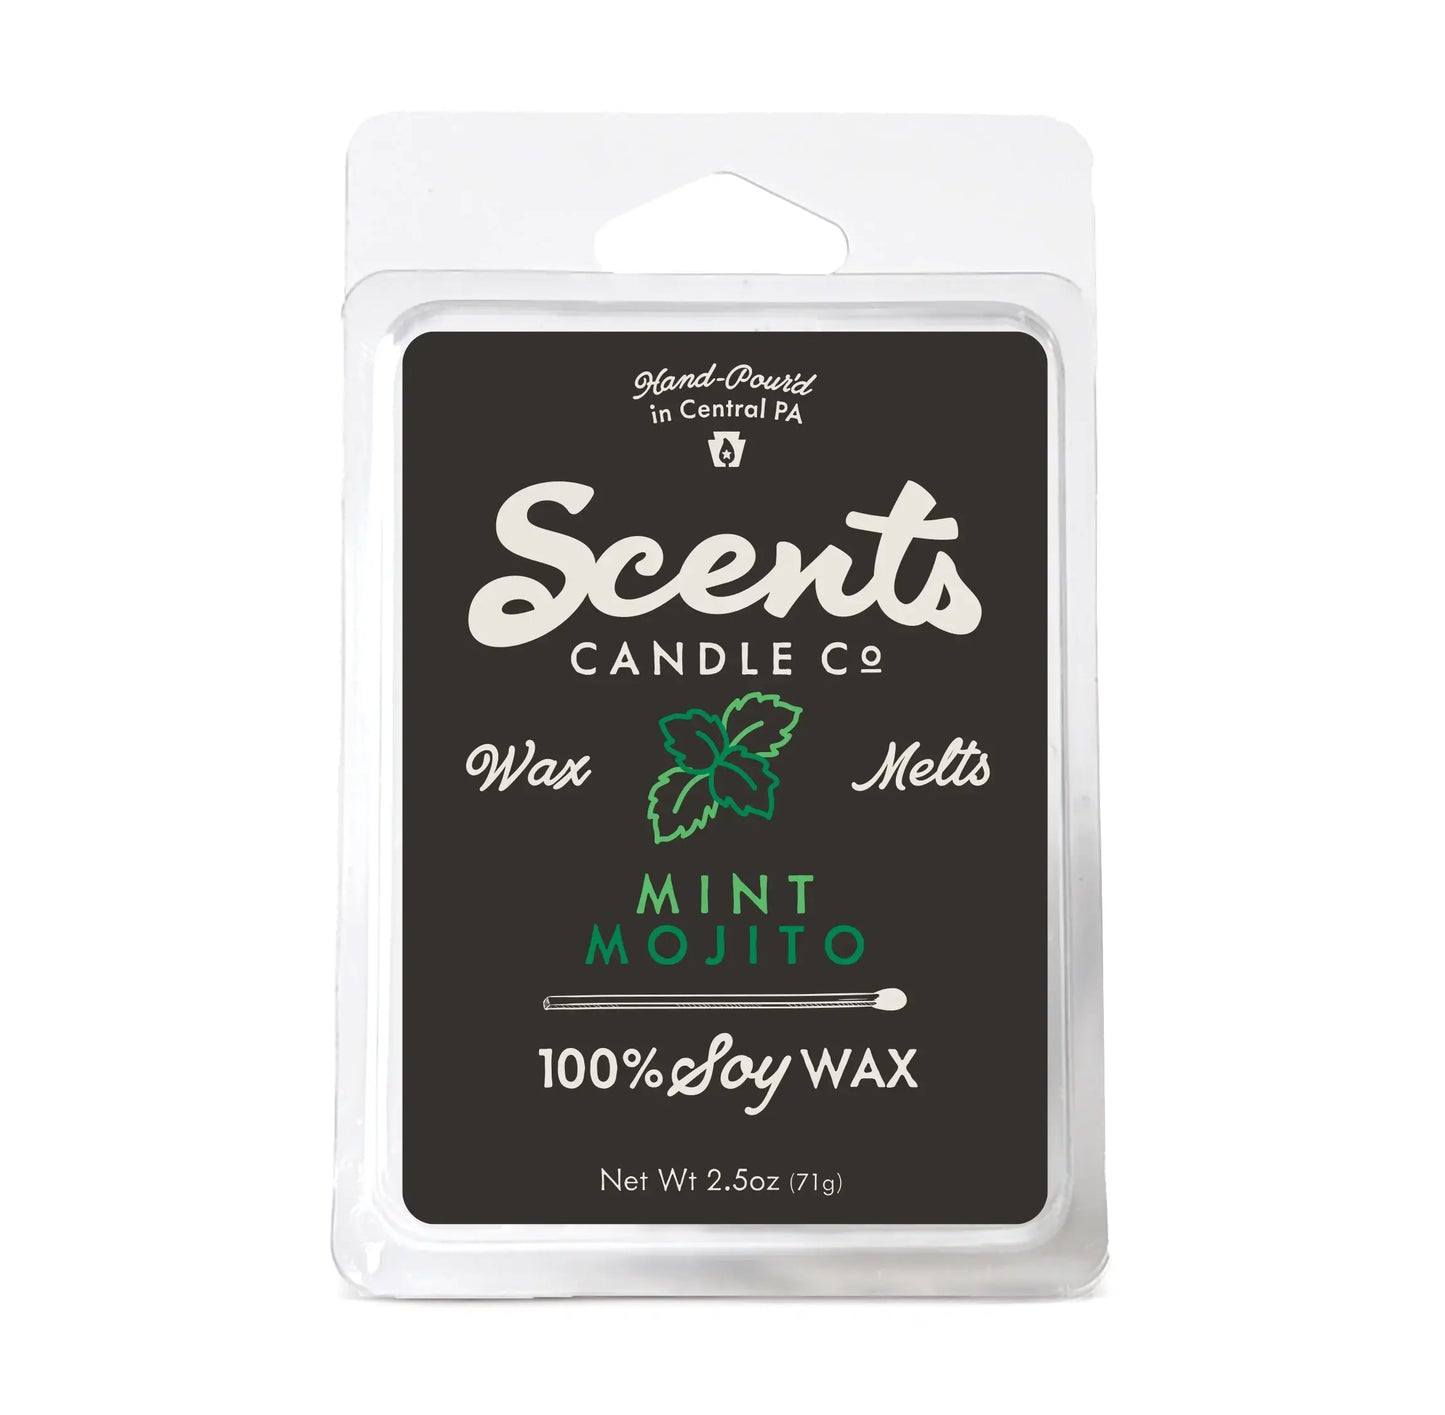 Scents Candle Co. Mint Mojito Wax Melt